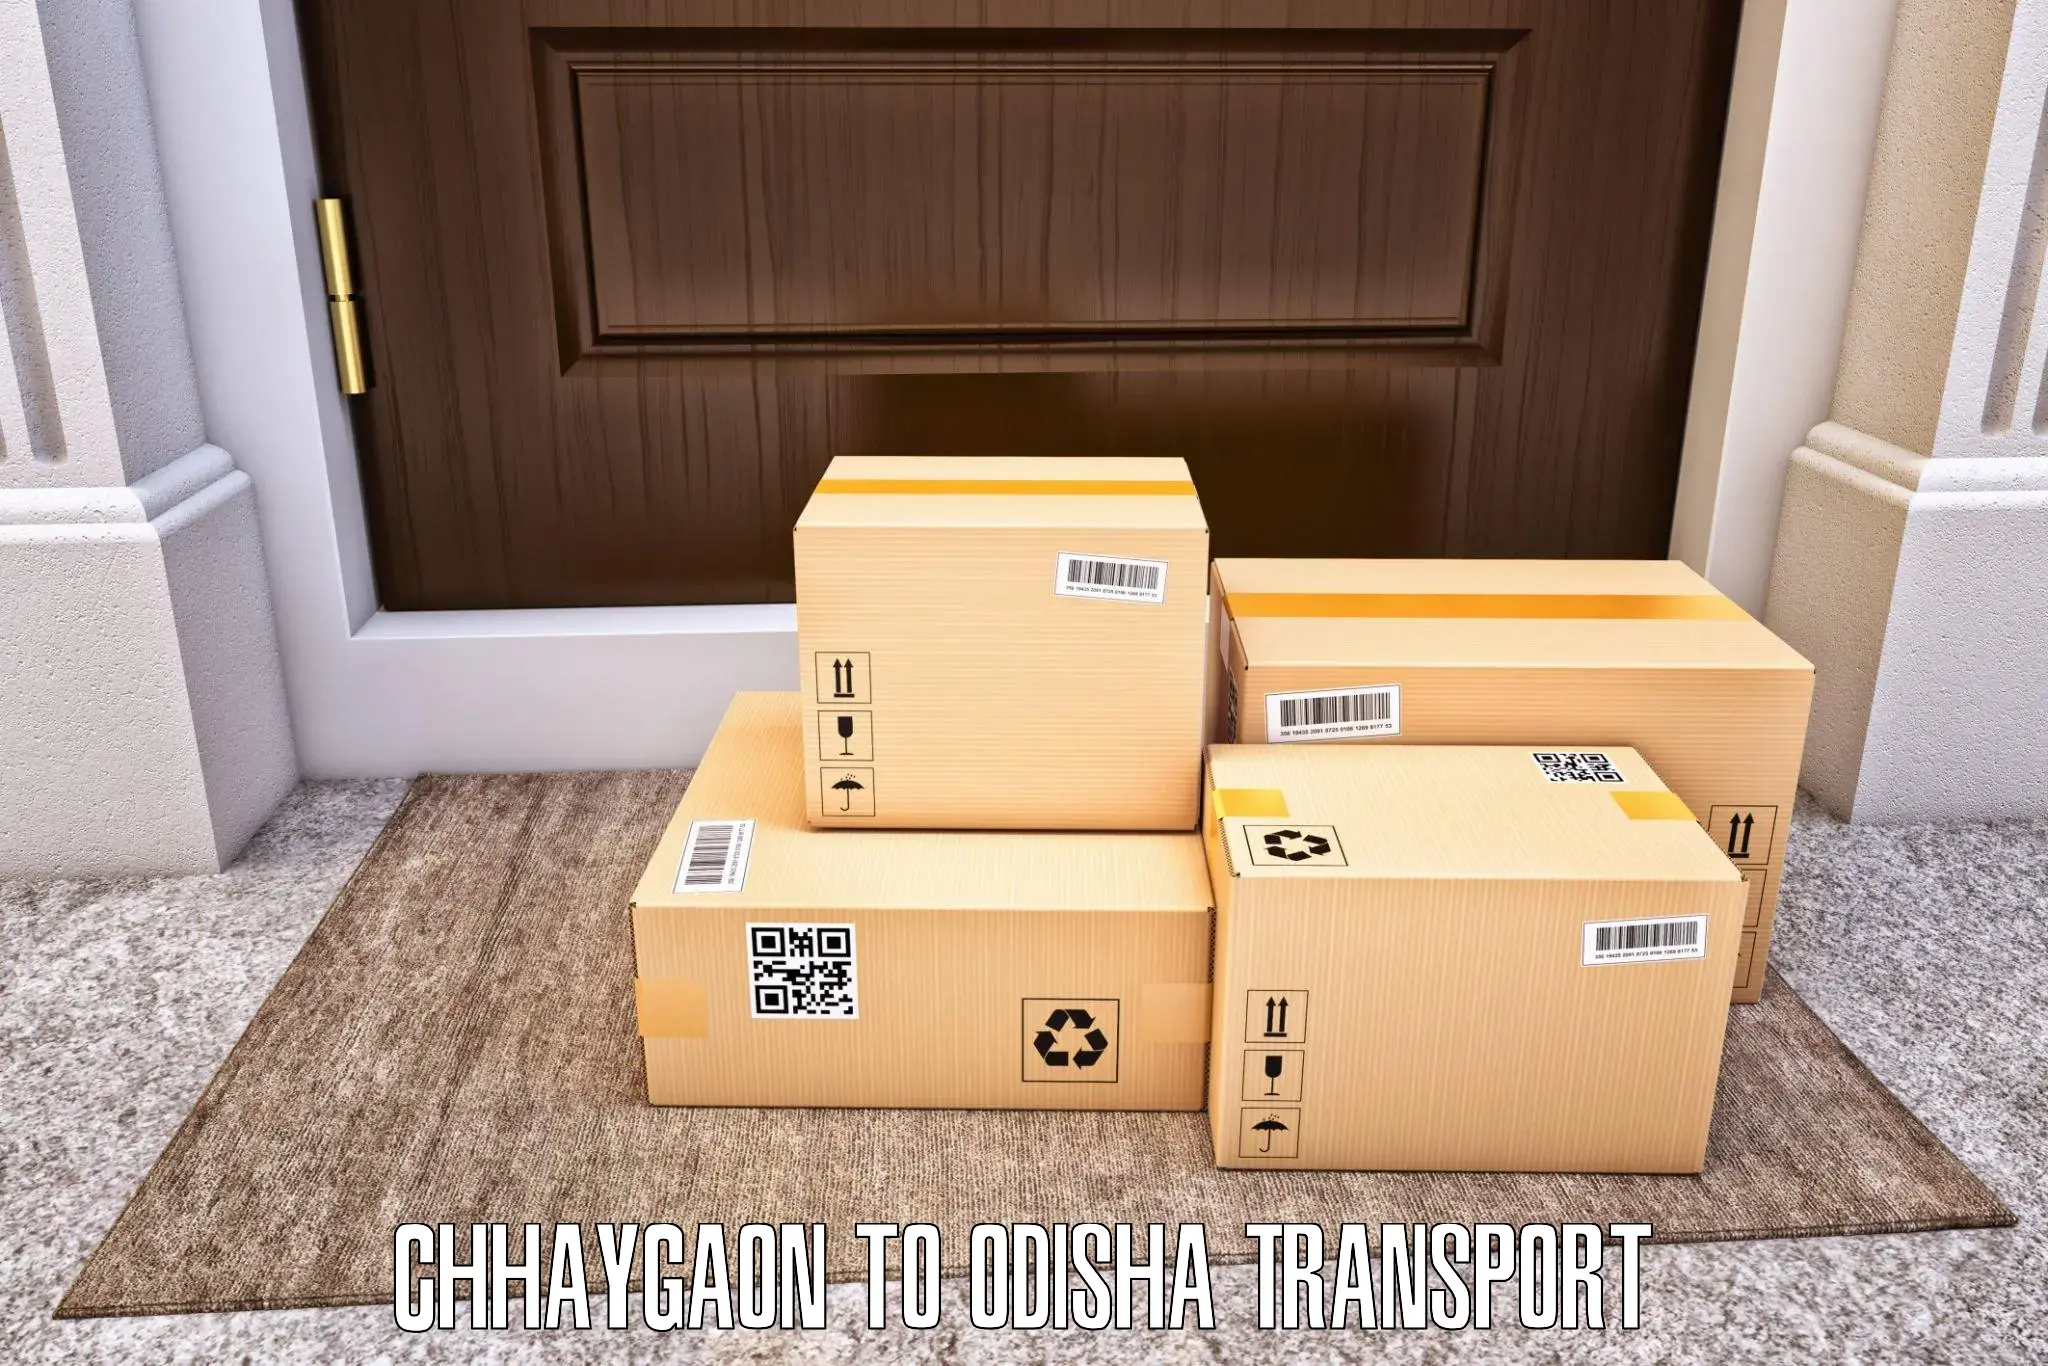 Container transport service Chhaygaon to Puri